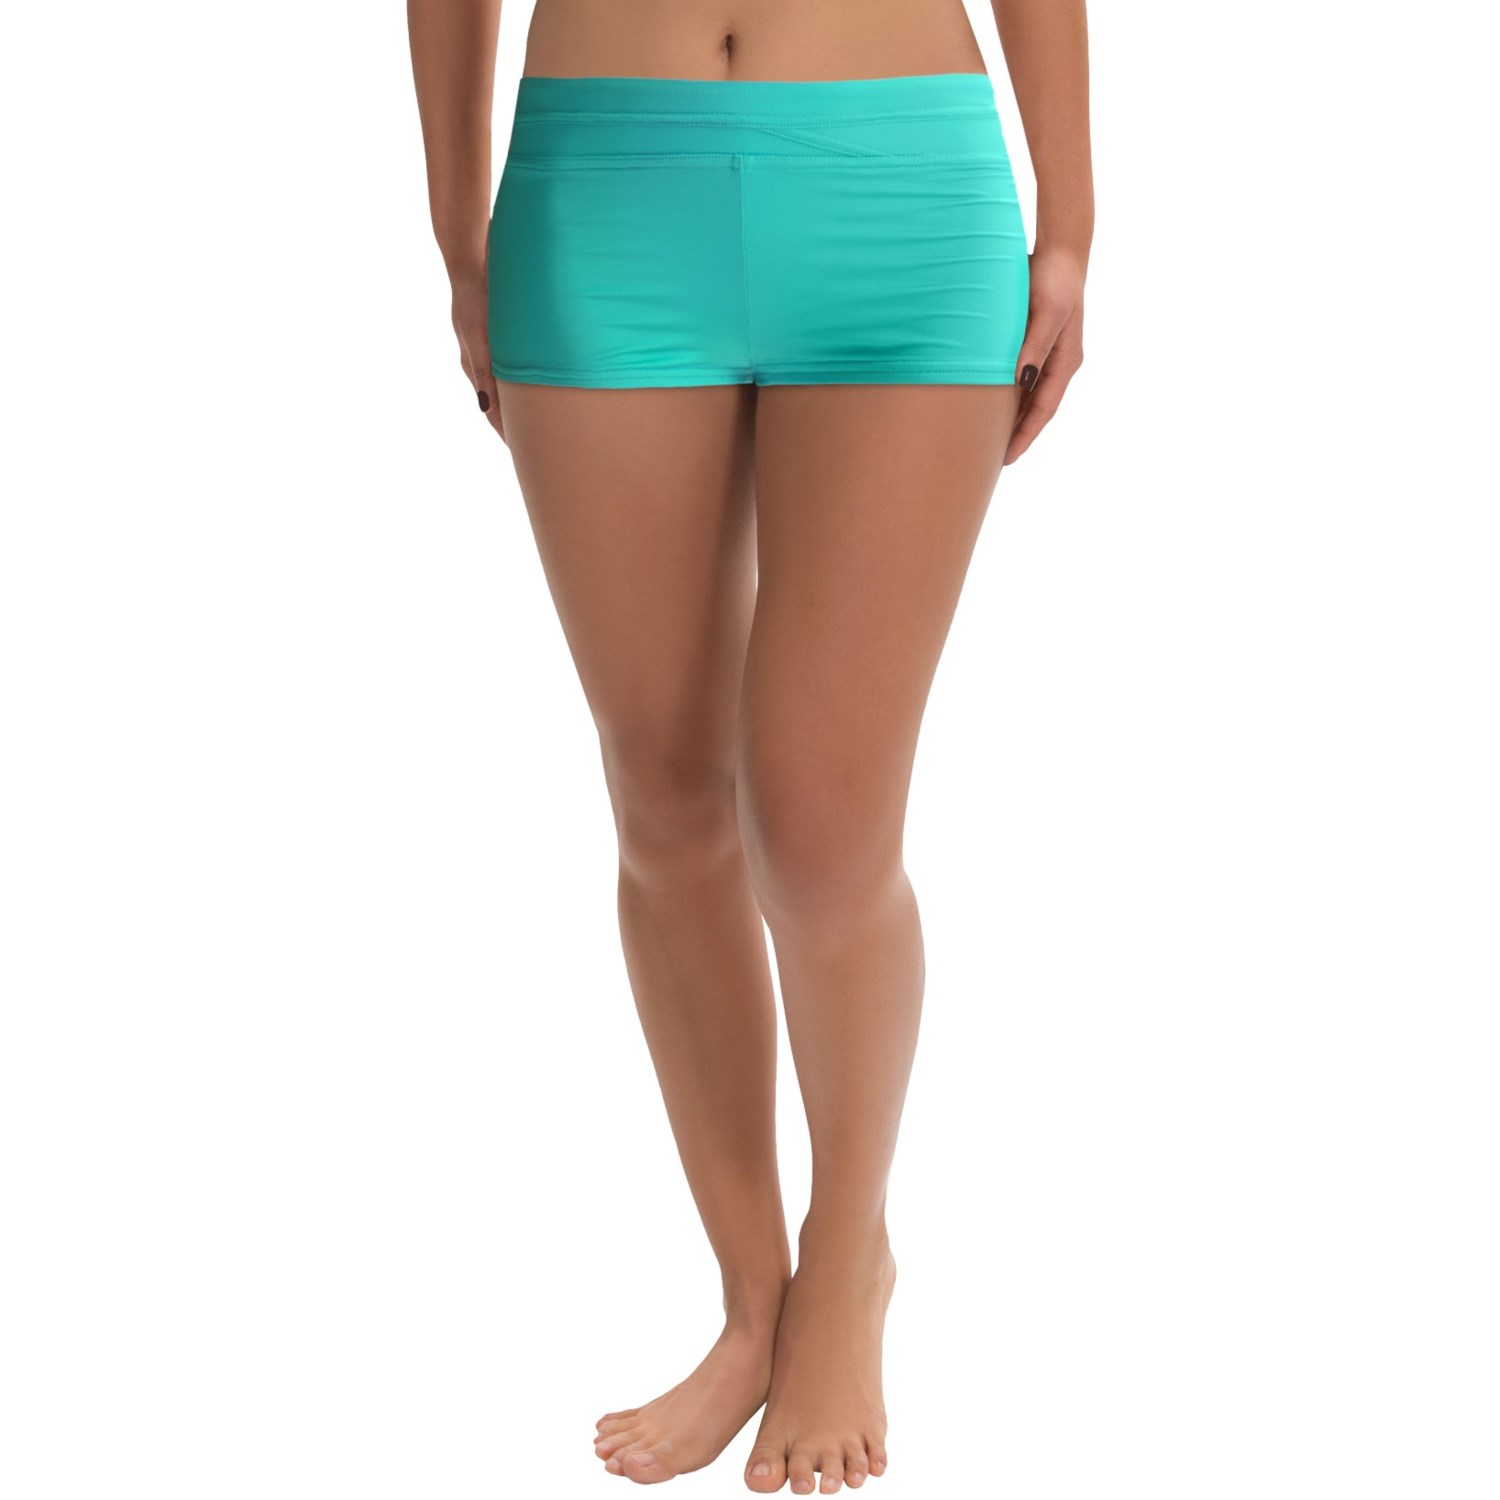 JAG Solid Swimsuit Bottoms (For Women) 7879T - Save 89%